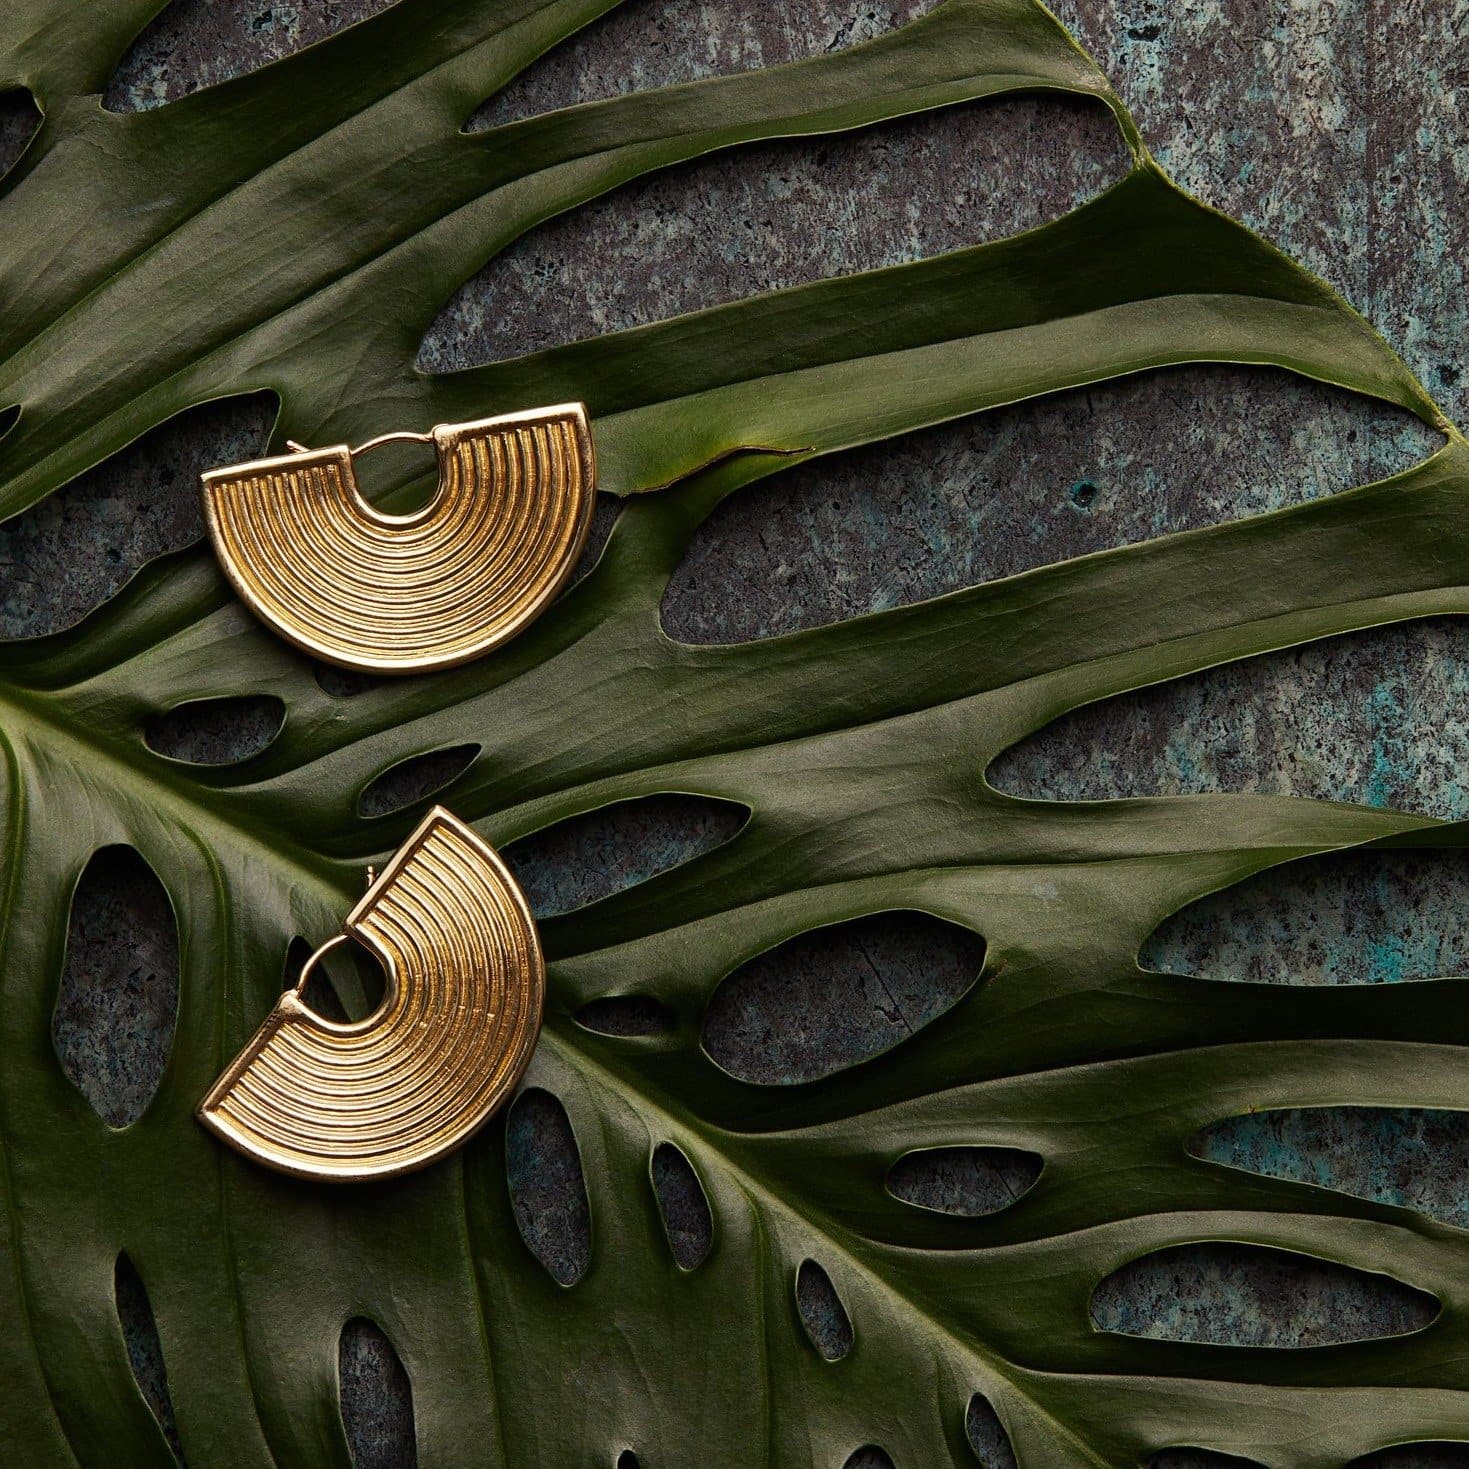 Diety Earrings by FUTURA - Gold Earrings Made with 18kt Ecological Gold